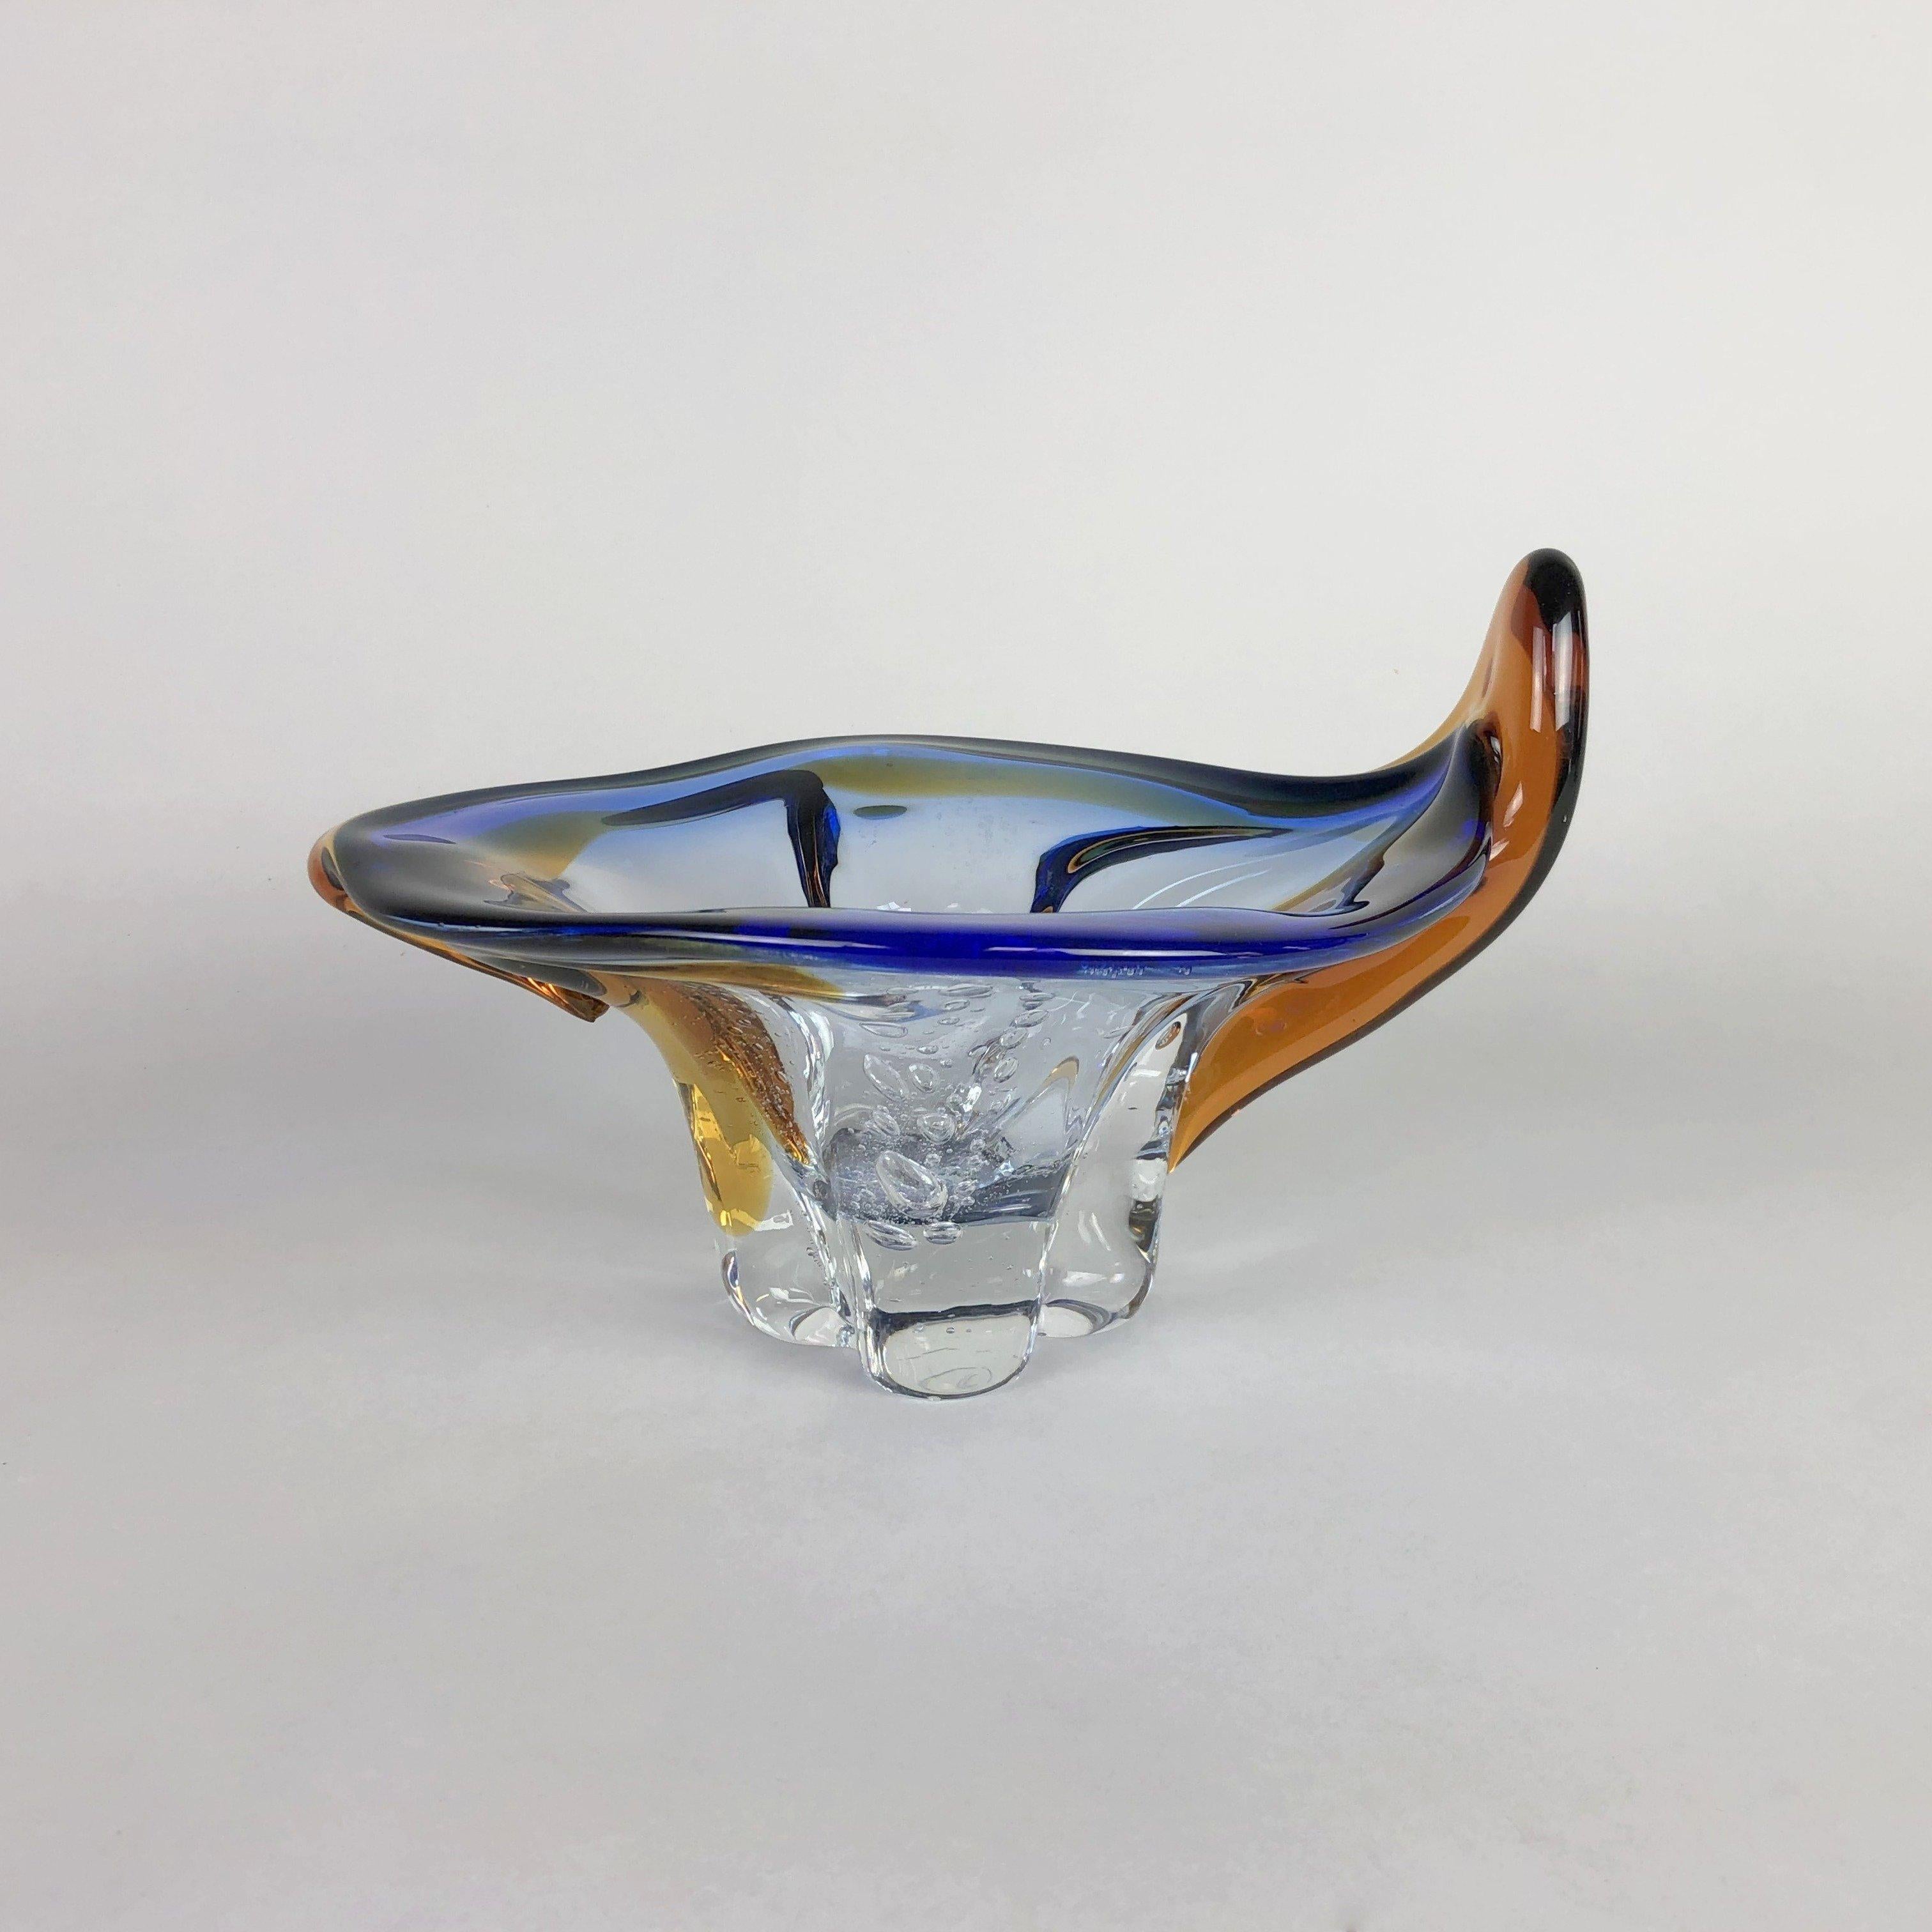 Very interesting, rare Bohemian glass bowl. Colourful glass bowl with bubbles. 
The bowl is approximately 16,5 cm (6.5 inch) high (at the highest point) and 27 cm (10.63 inch) wide and 21 cm (8.3 inch) deep. Weight is about 2,02 kg (4.45 pound).